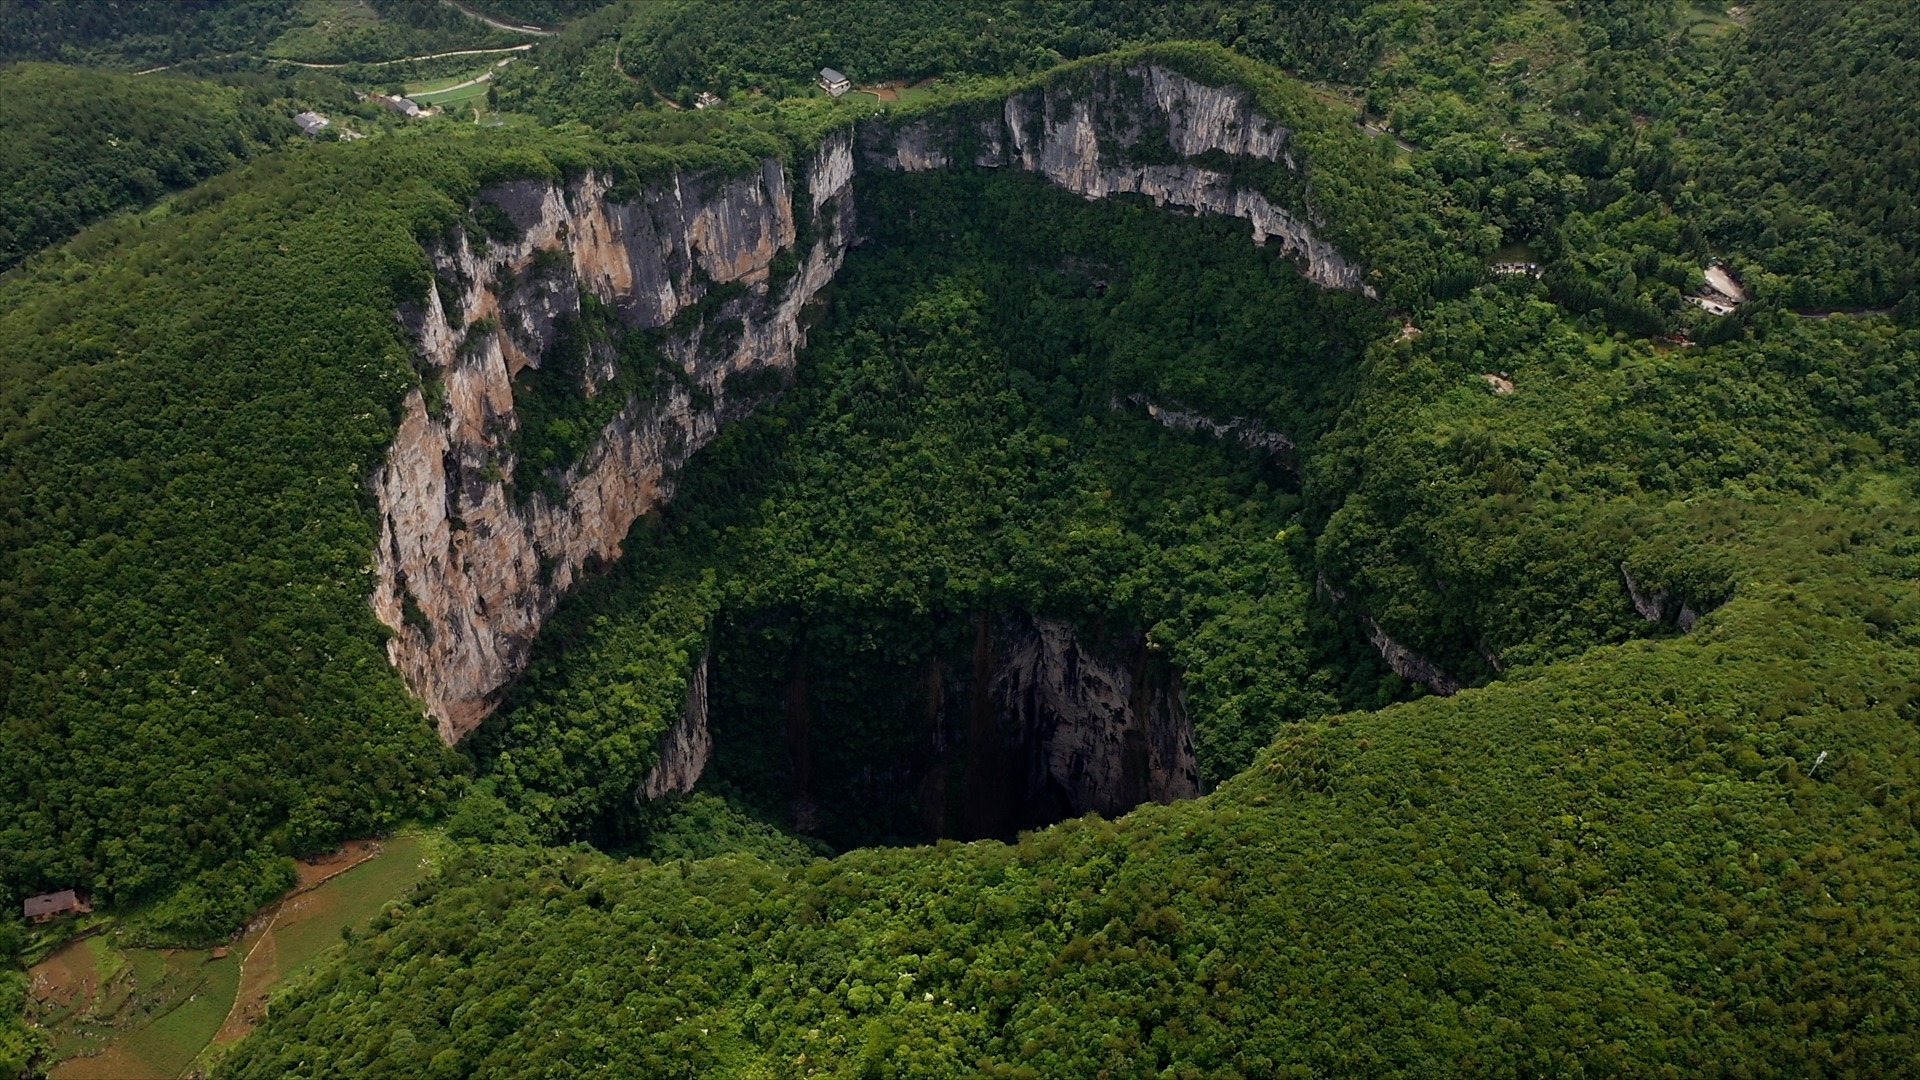 Is this the world’s deepest sinkhole?